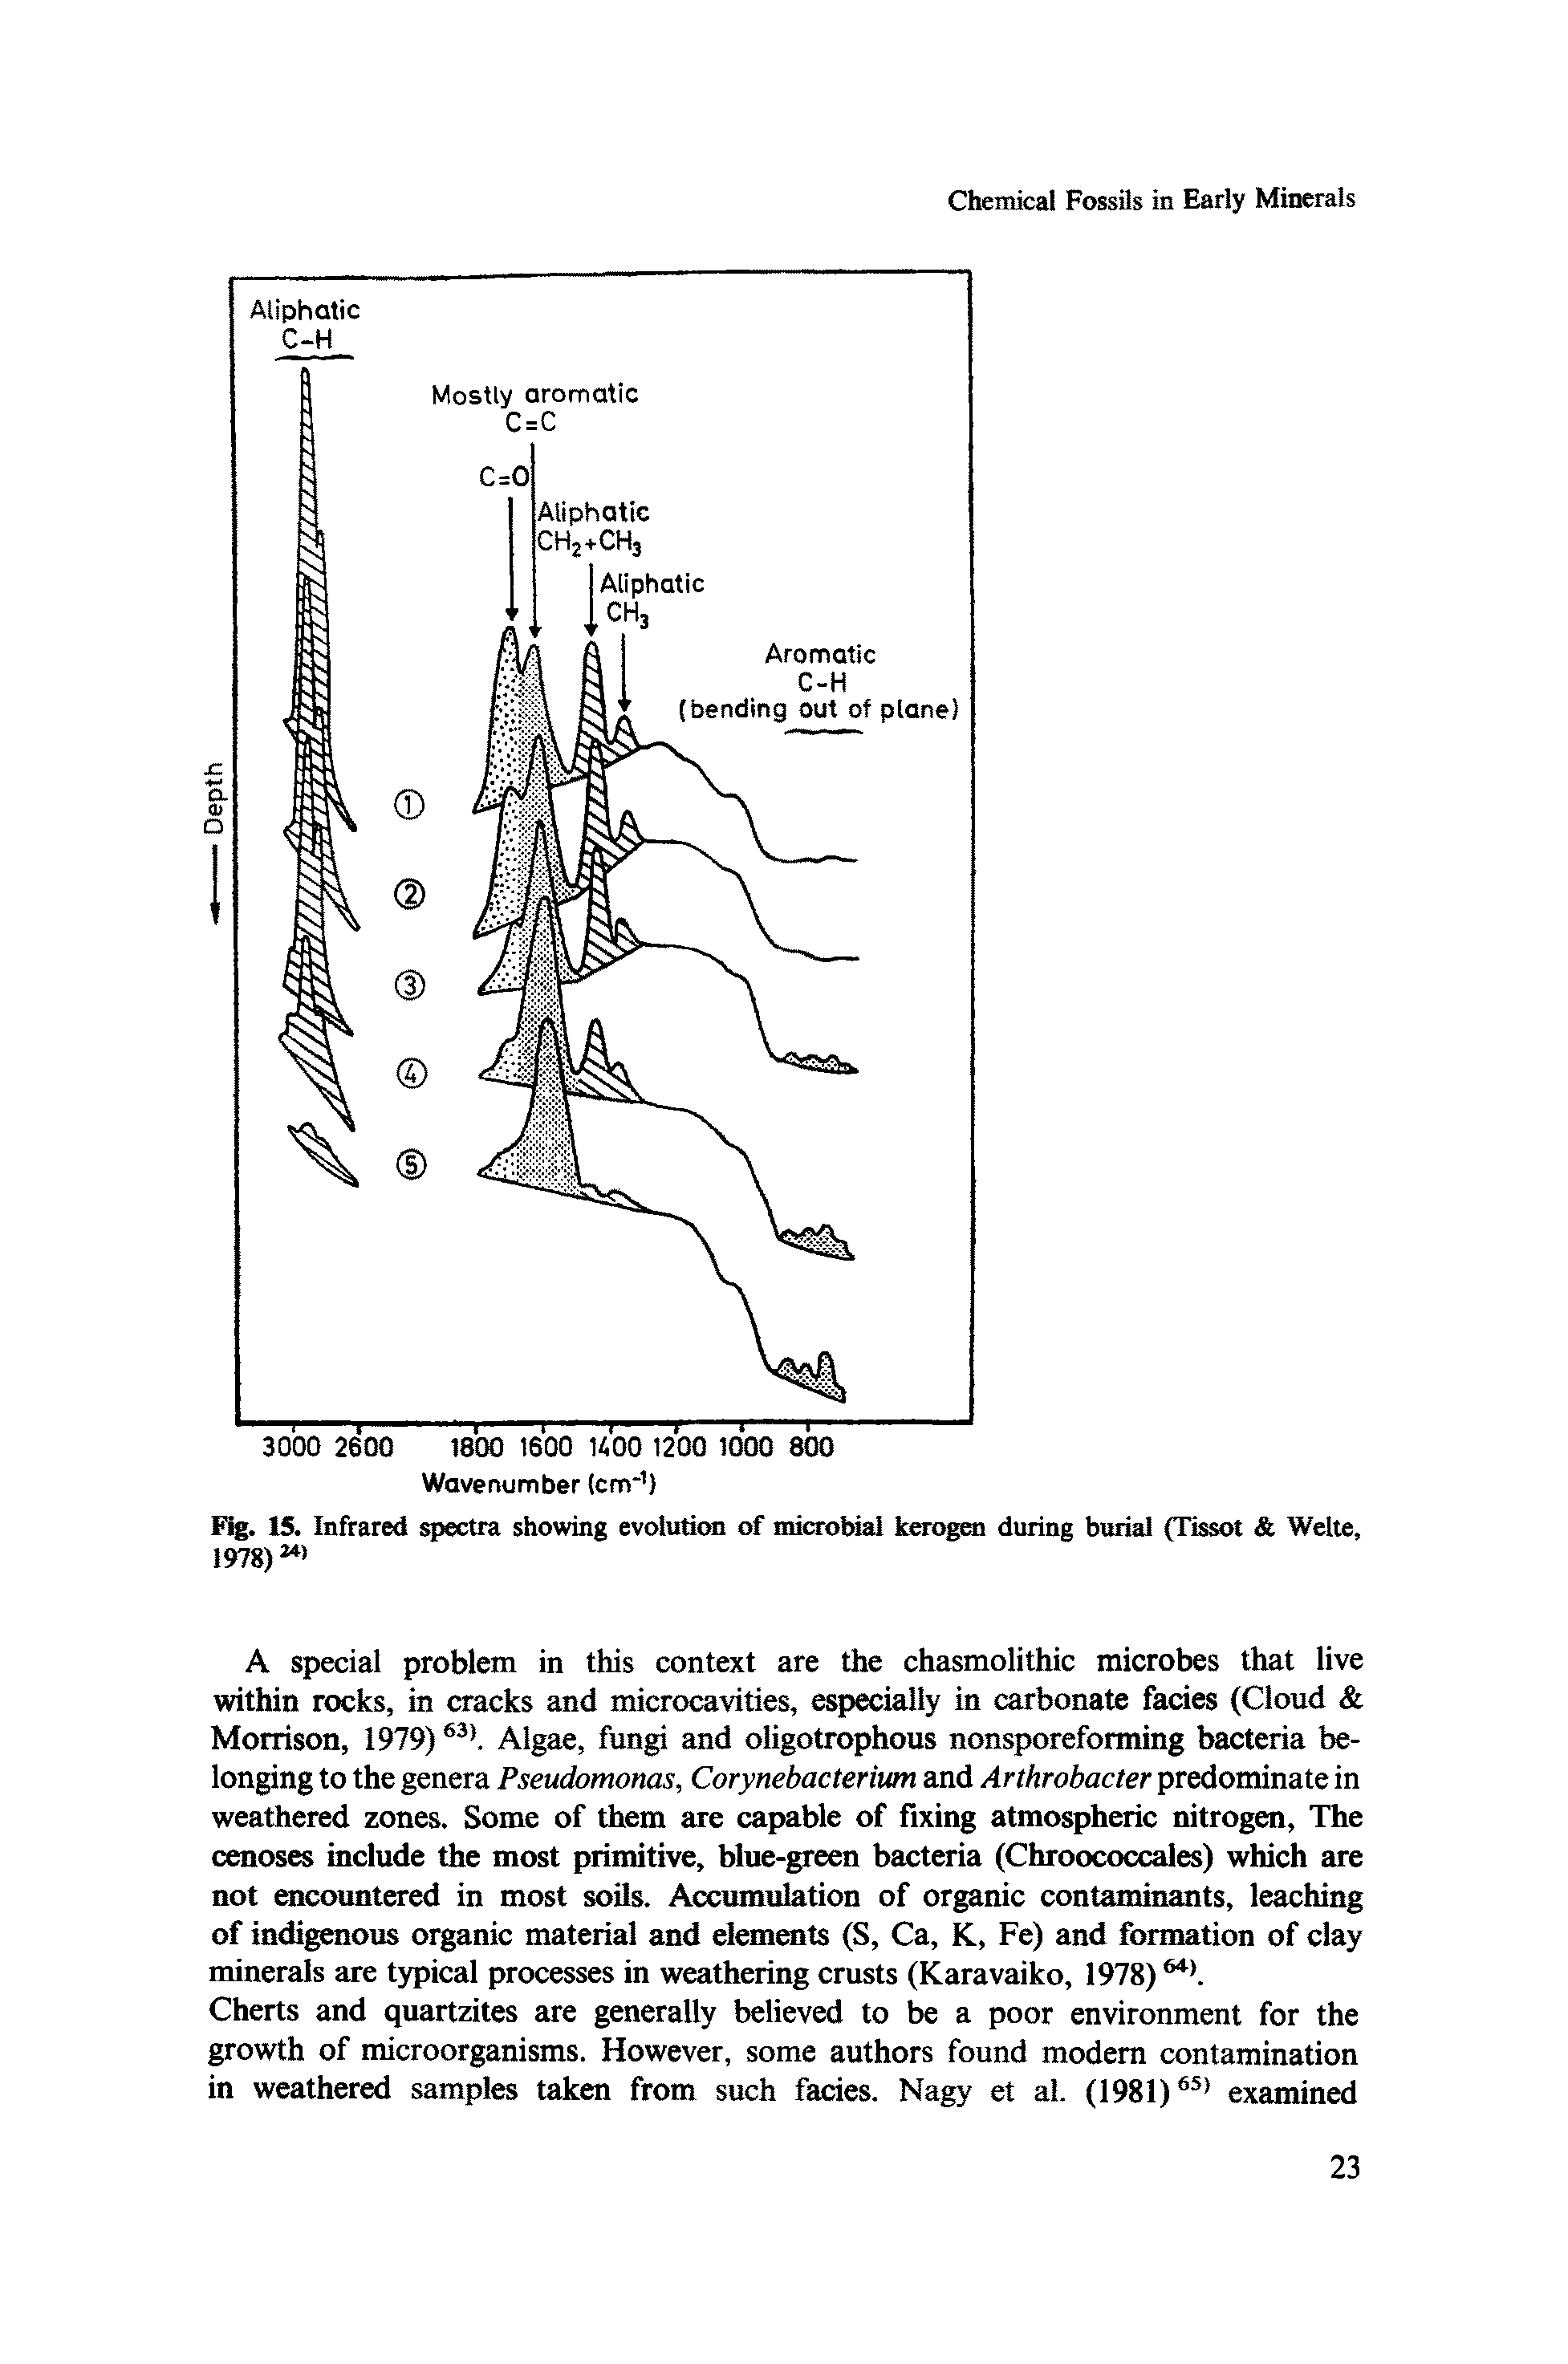 Fig. 15. Infrared spectra showing evolution of microbial kerogen during burial (Tissot Welte, 1978) 241...